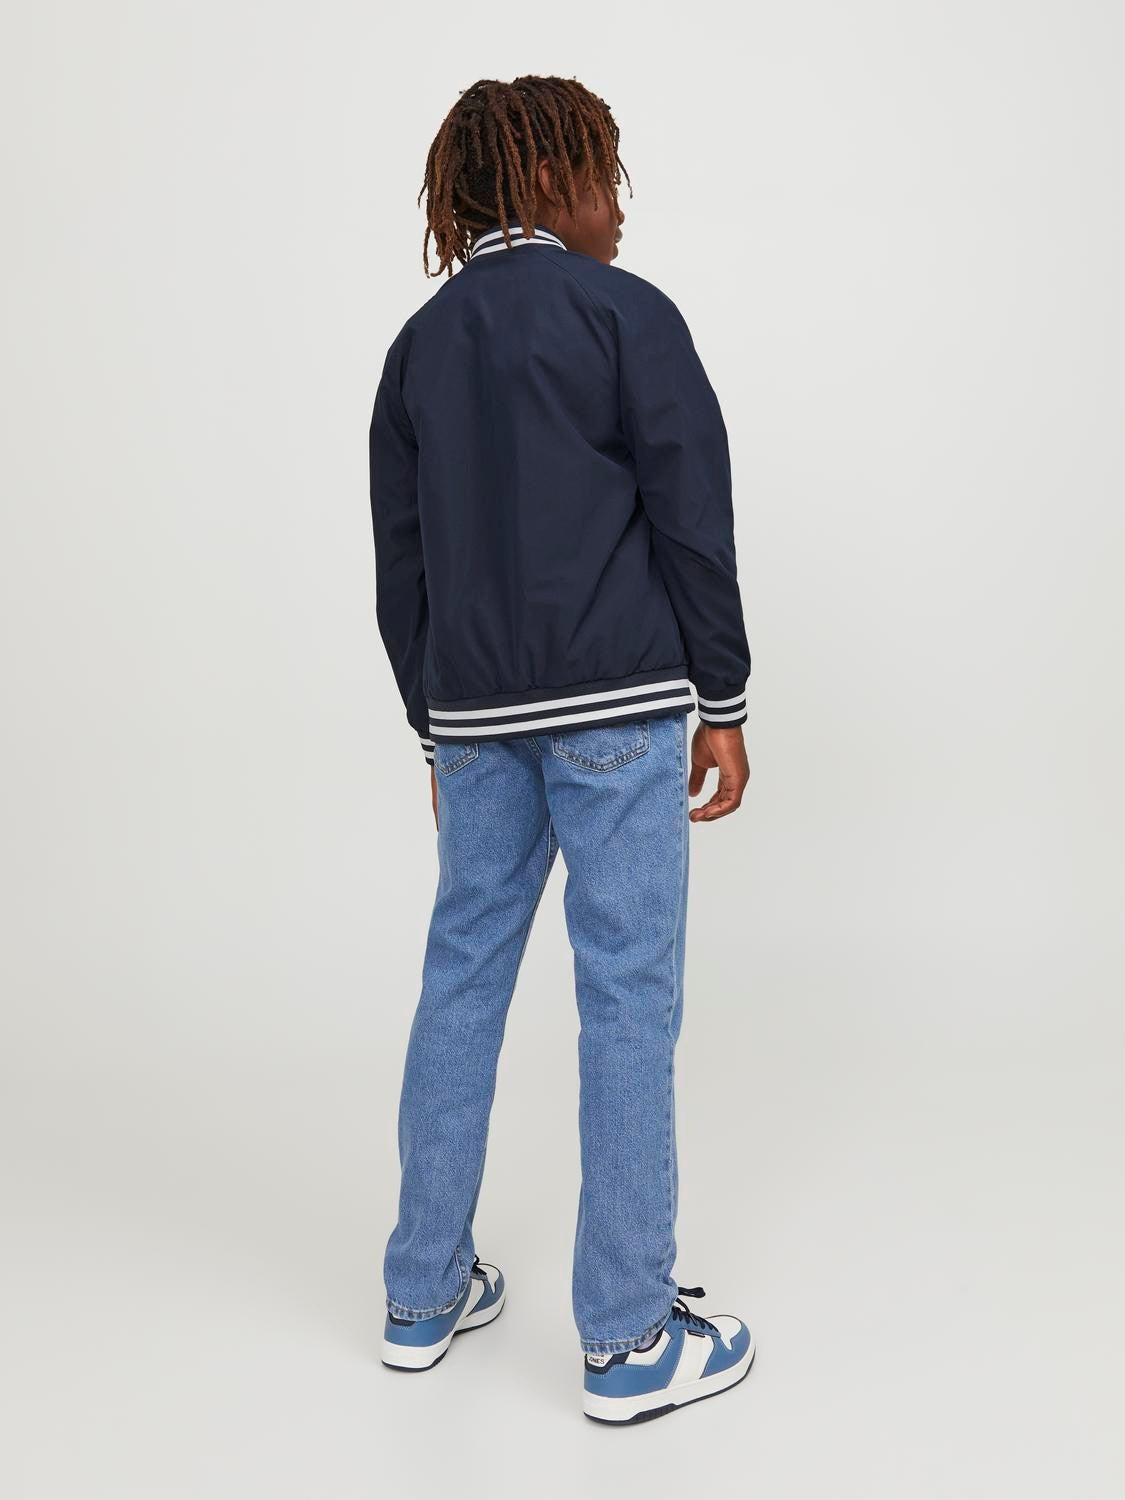 Lucca Junior Boys Navy Bomber Jacket-Back view